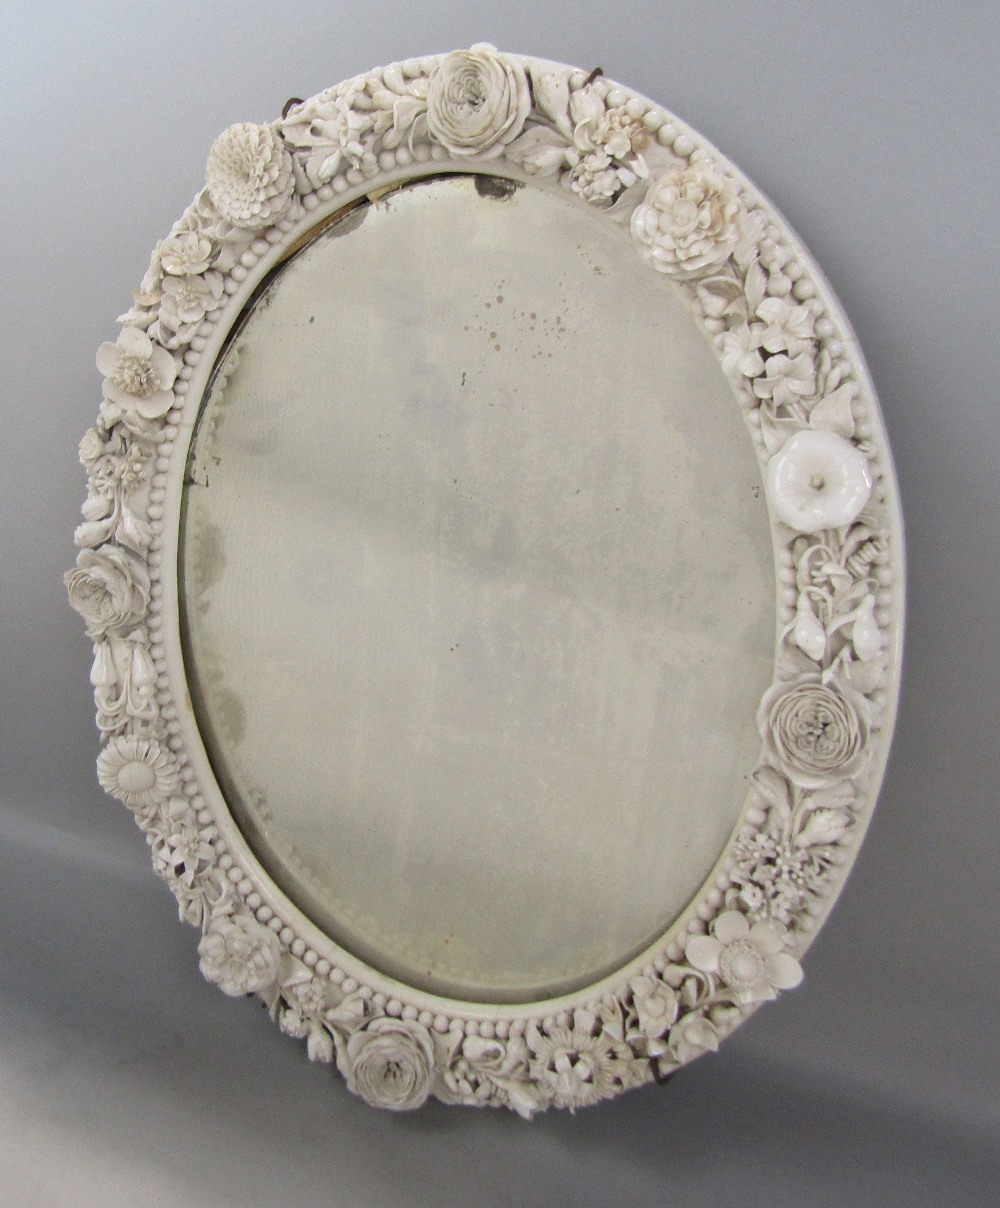 19th century blanc de chine porcelain oval wall mirror, decorated with various delicate flower work,